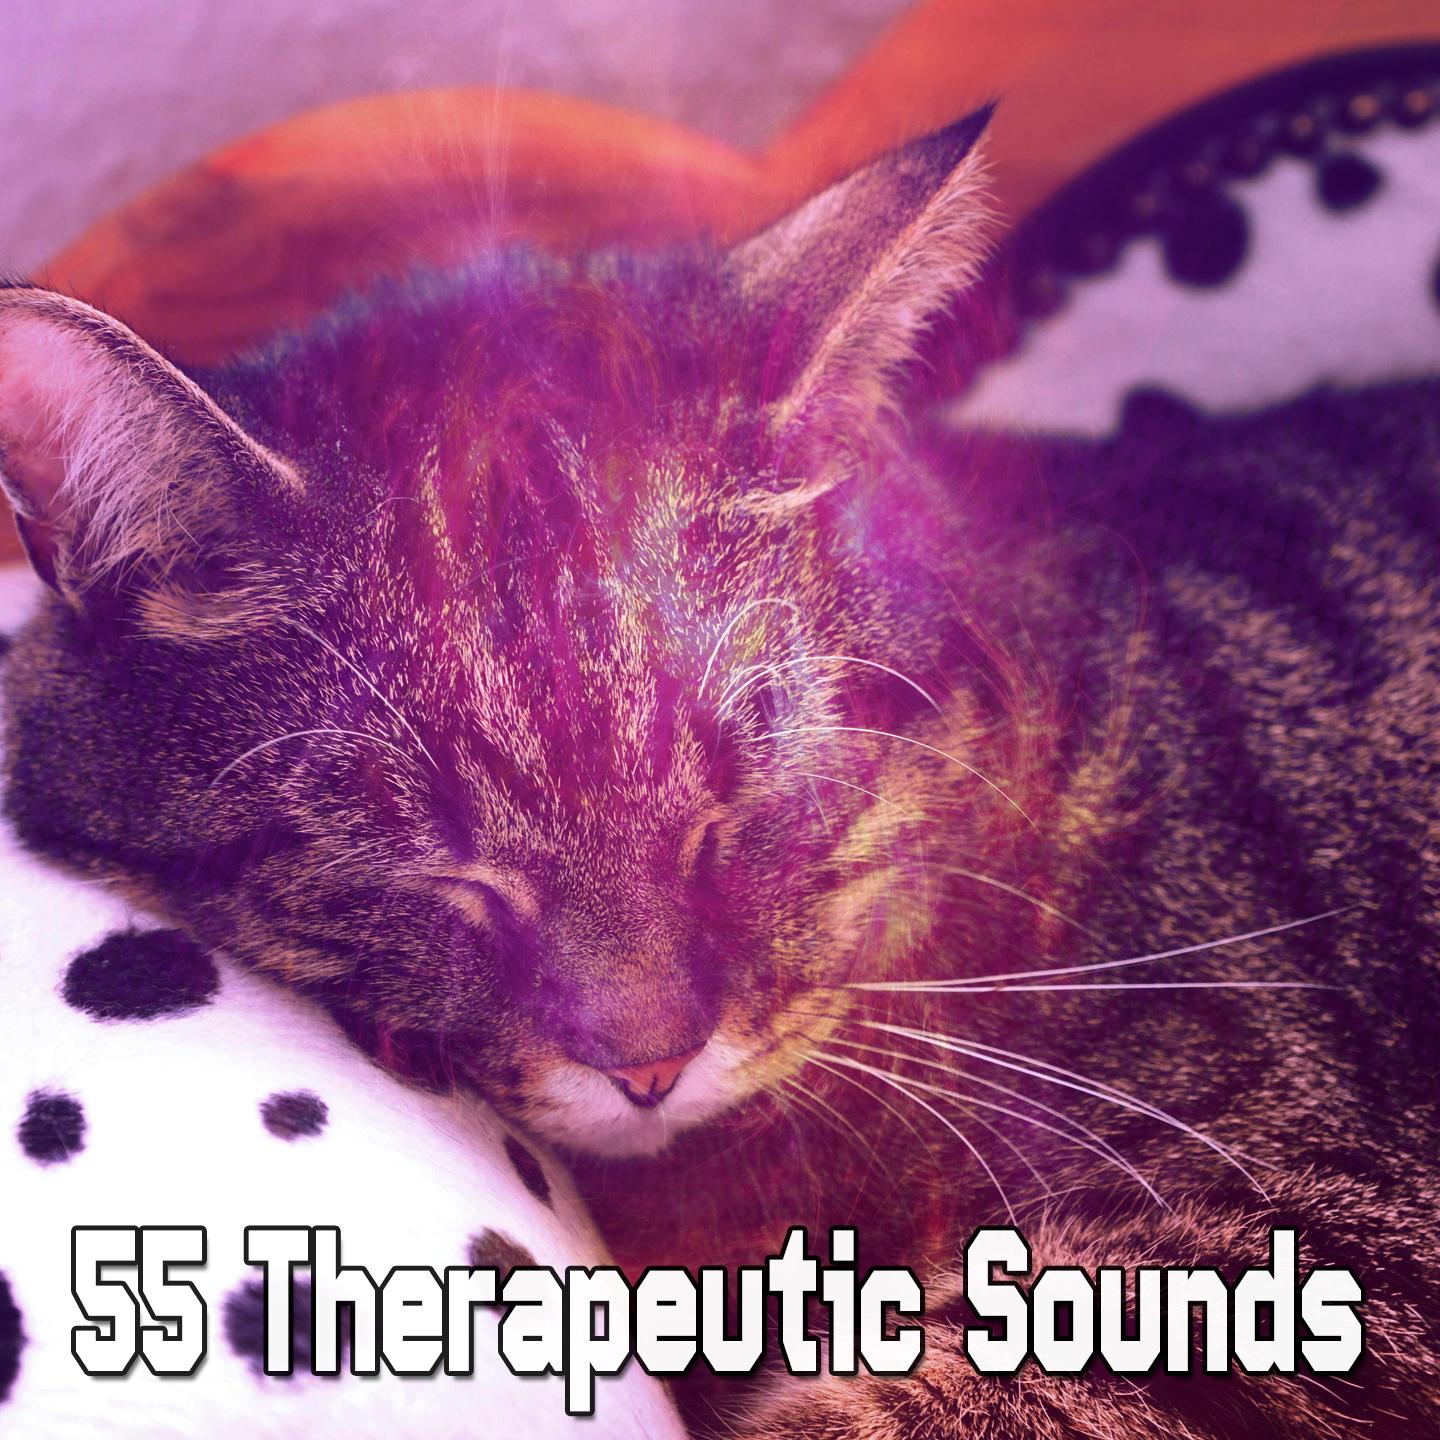 55 Therapeutic Sounds